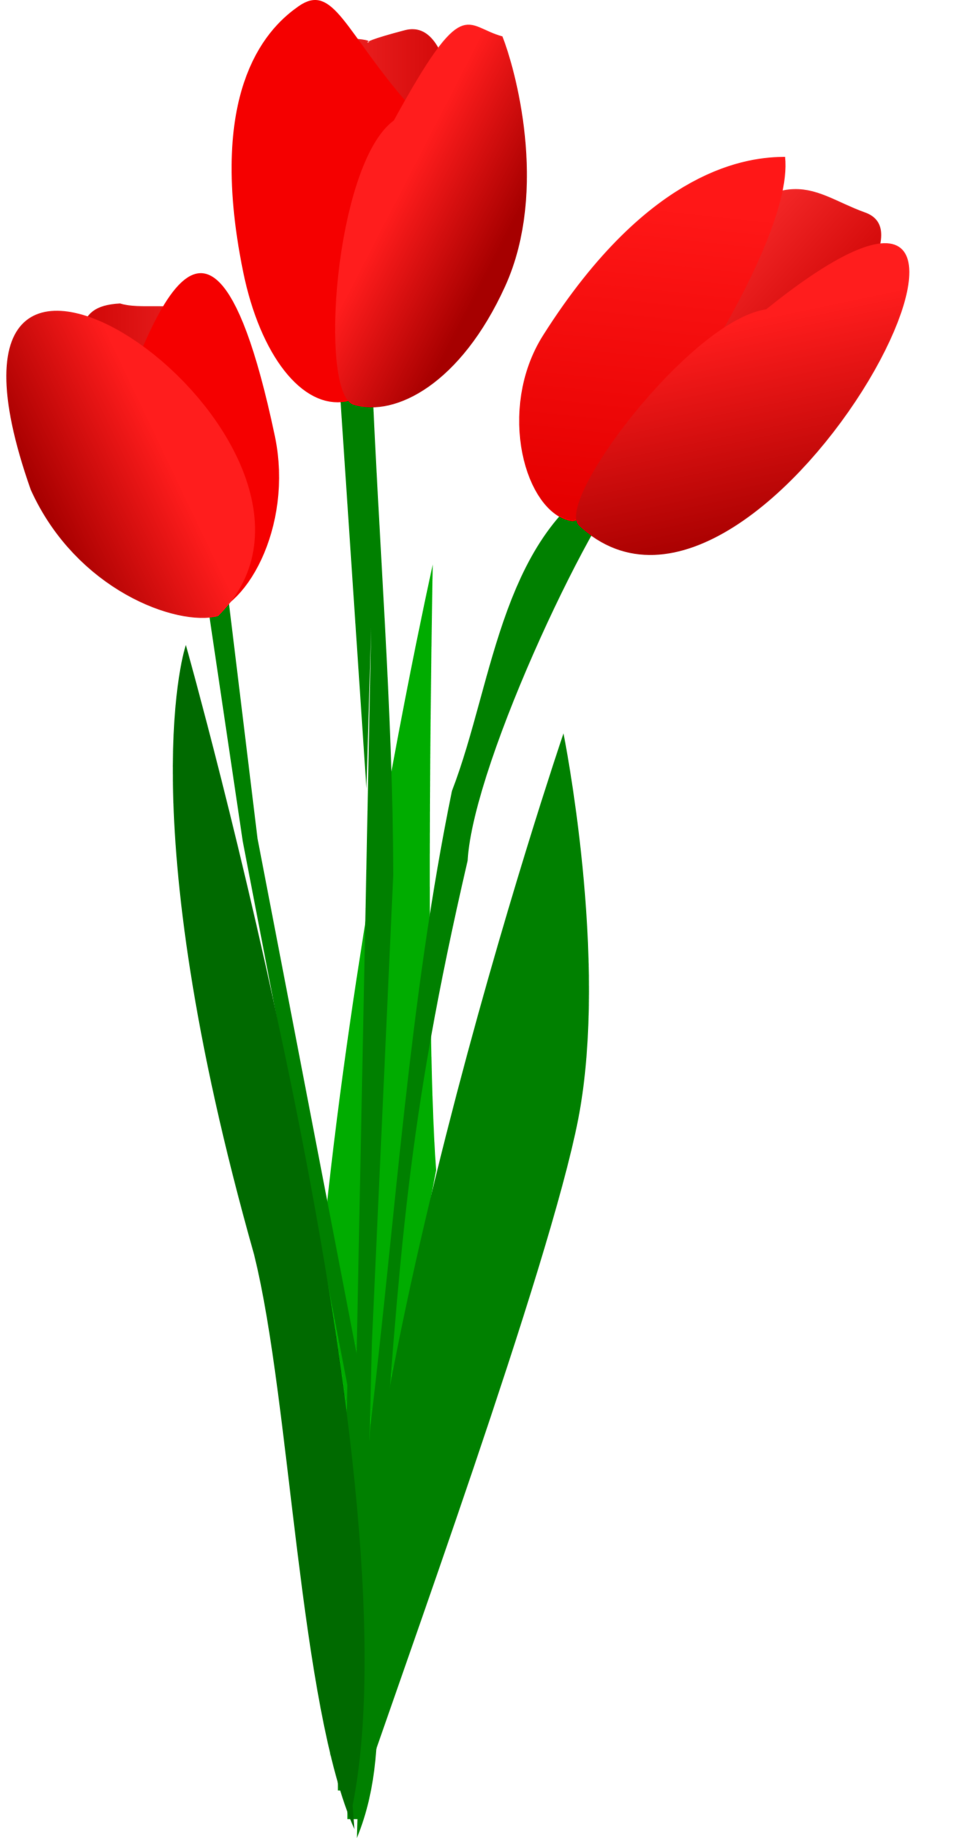 There Is 32 Tulip Border   Free Cliparts All Used For Free